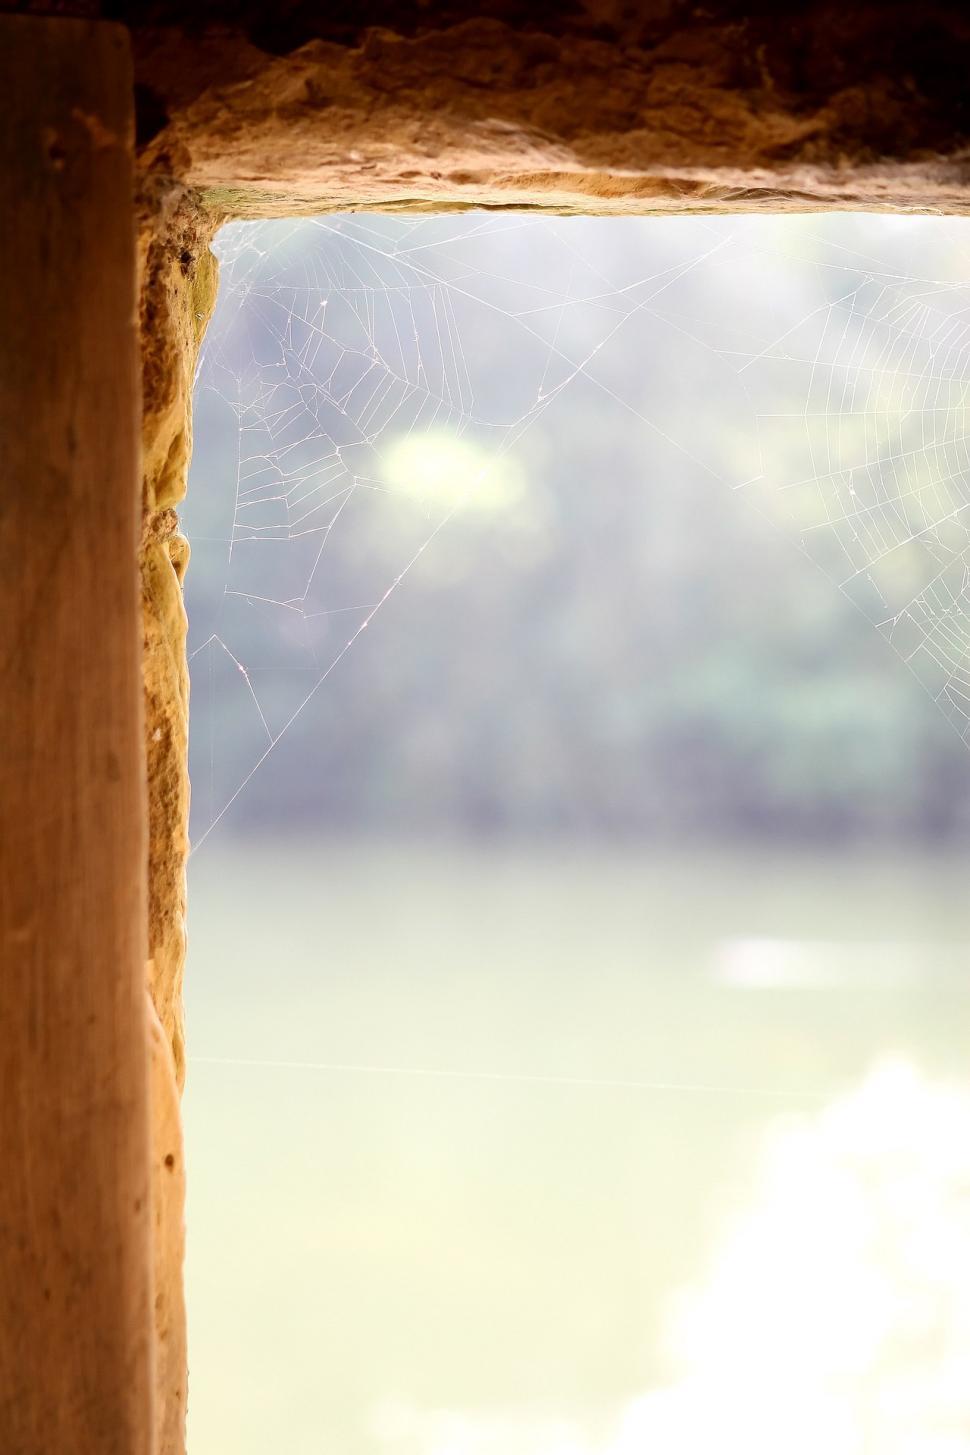 Free Image of Spider Web Hanging From Side of Window 